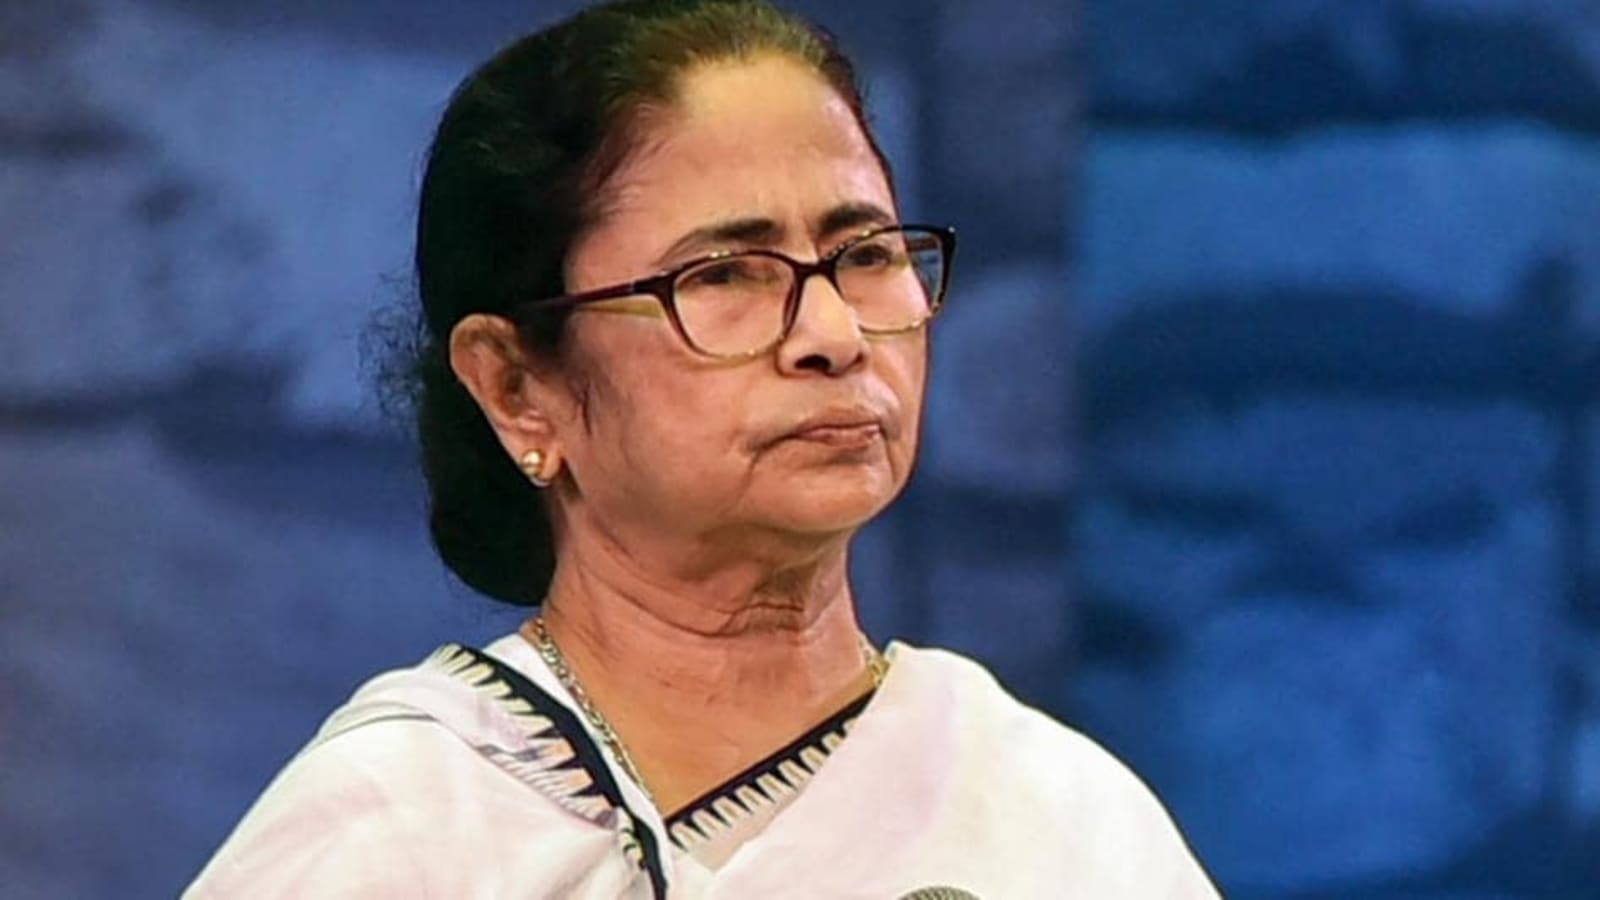 BJP trying to create armed cadre base through 'Agnipath' scheme, alleges Mamata | Latest News India - Hindustan Times